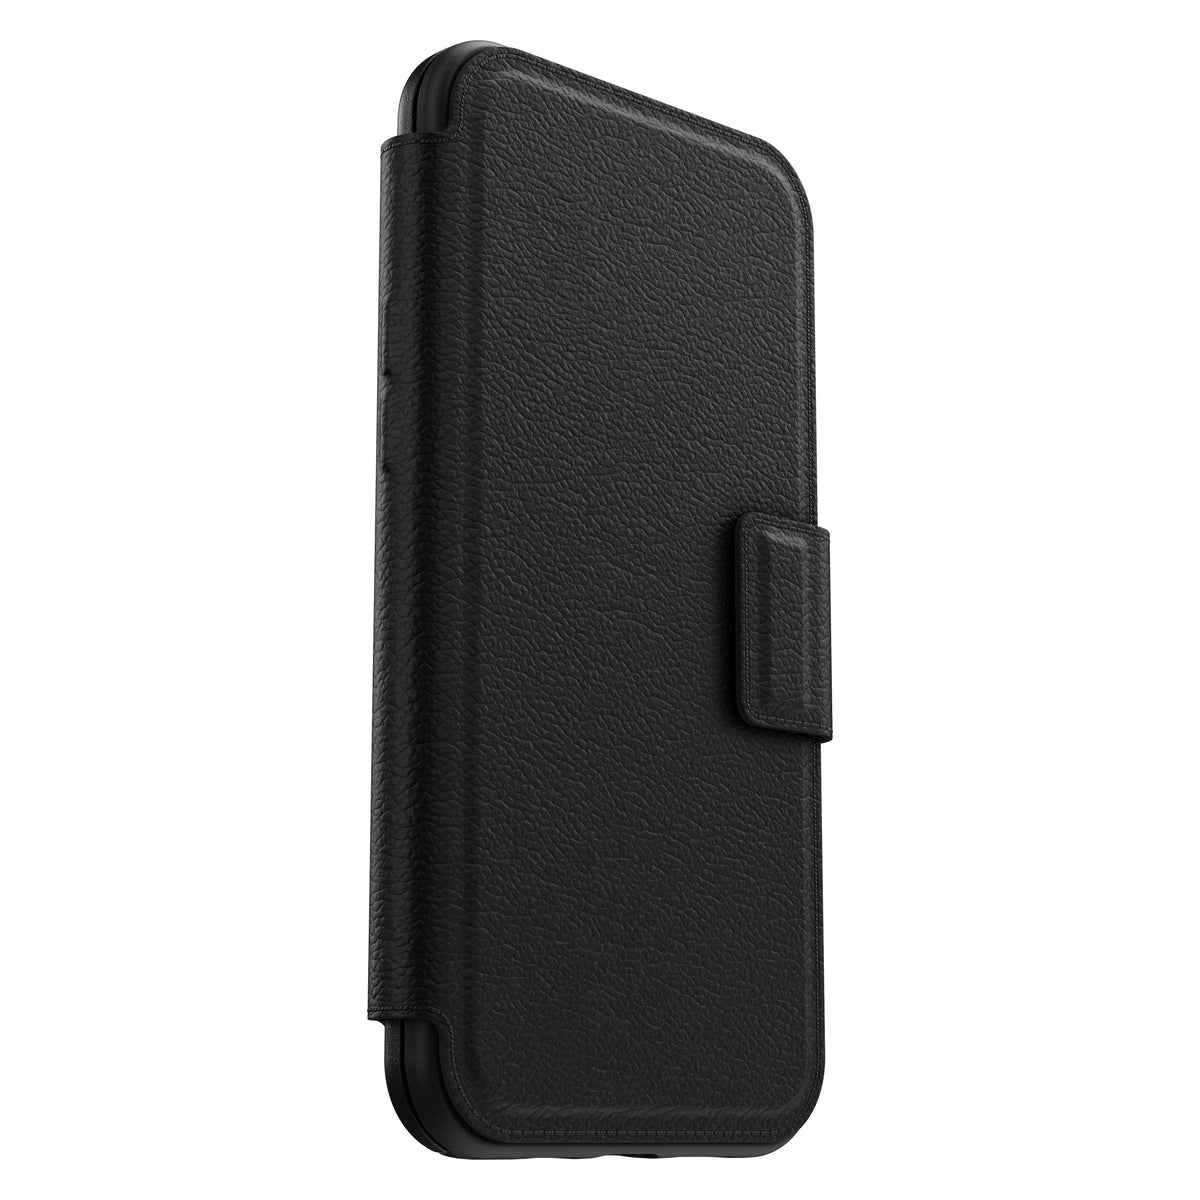 OTTERBOX iPhone 12 Pro Max - Magsafe Folio only - Case not included - Black